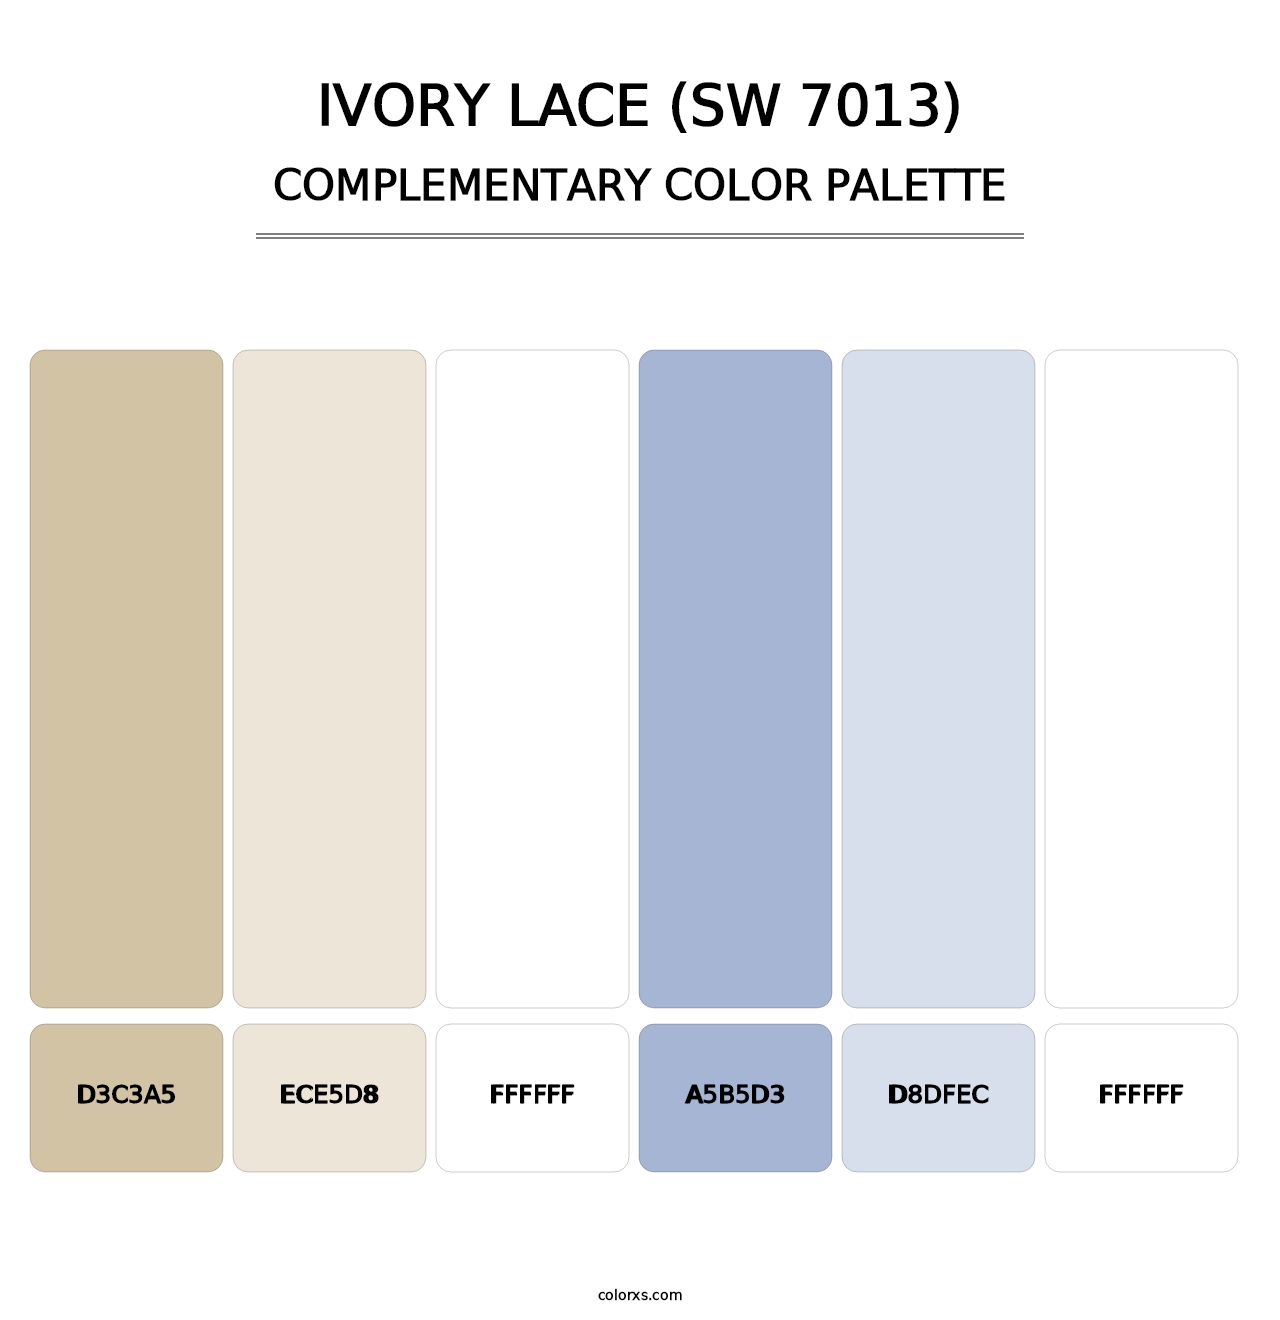 Ivory Lace (SW 7013) - Complementary Color Palette